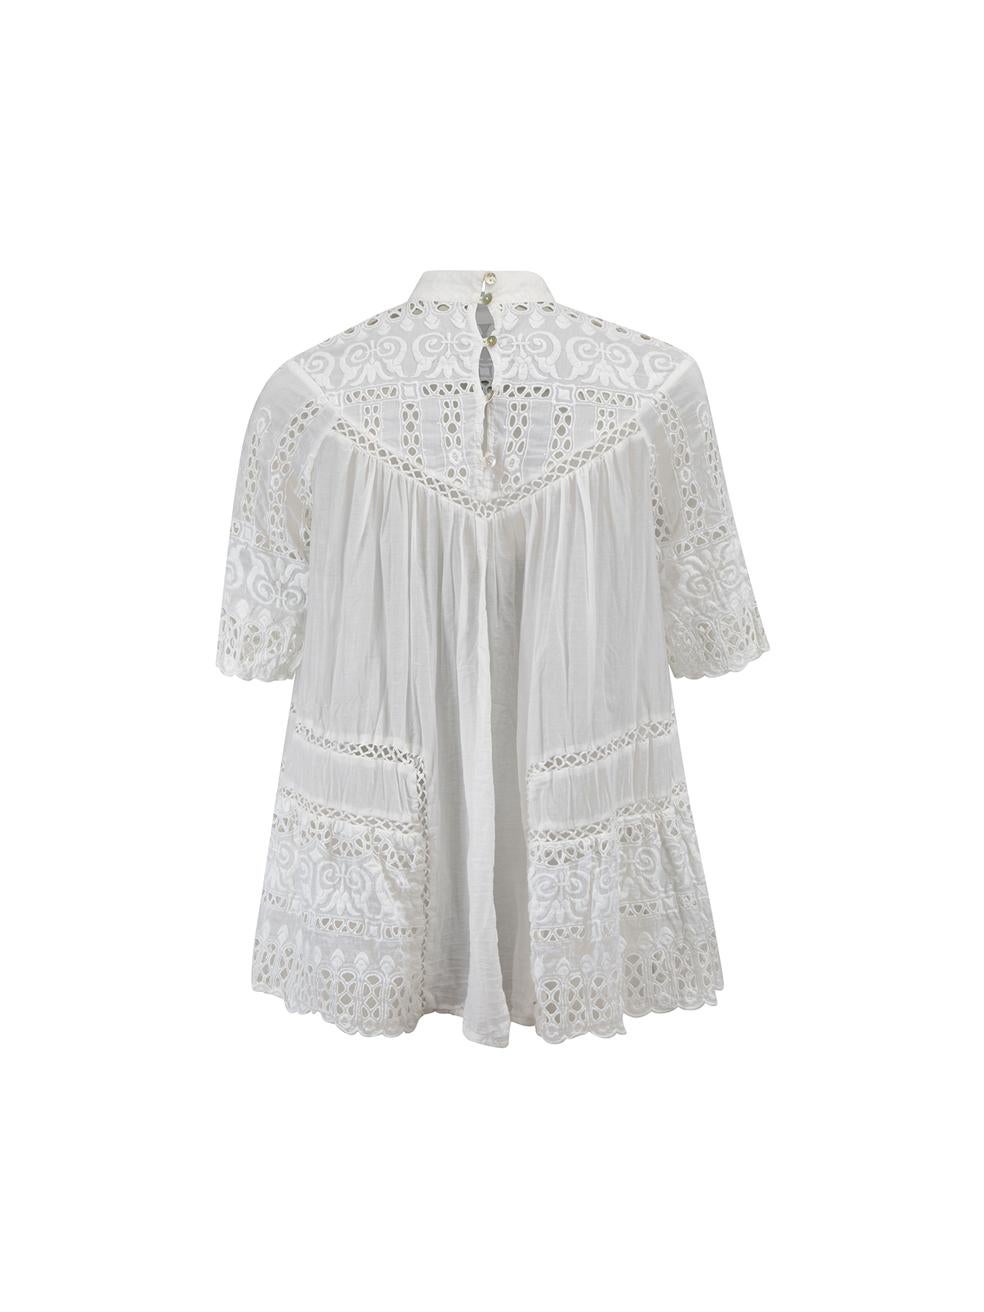 Zimmermann White Cotton Broderie Anglaise Lace Cut-Out Smock Top Size M In Good Condition In London, GB